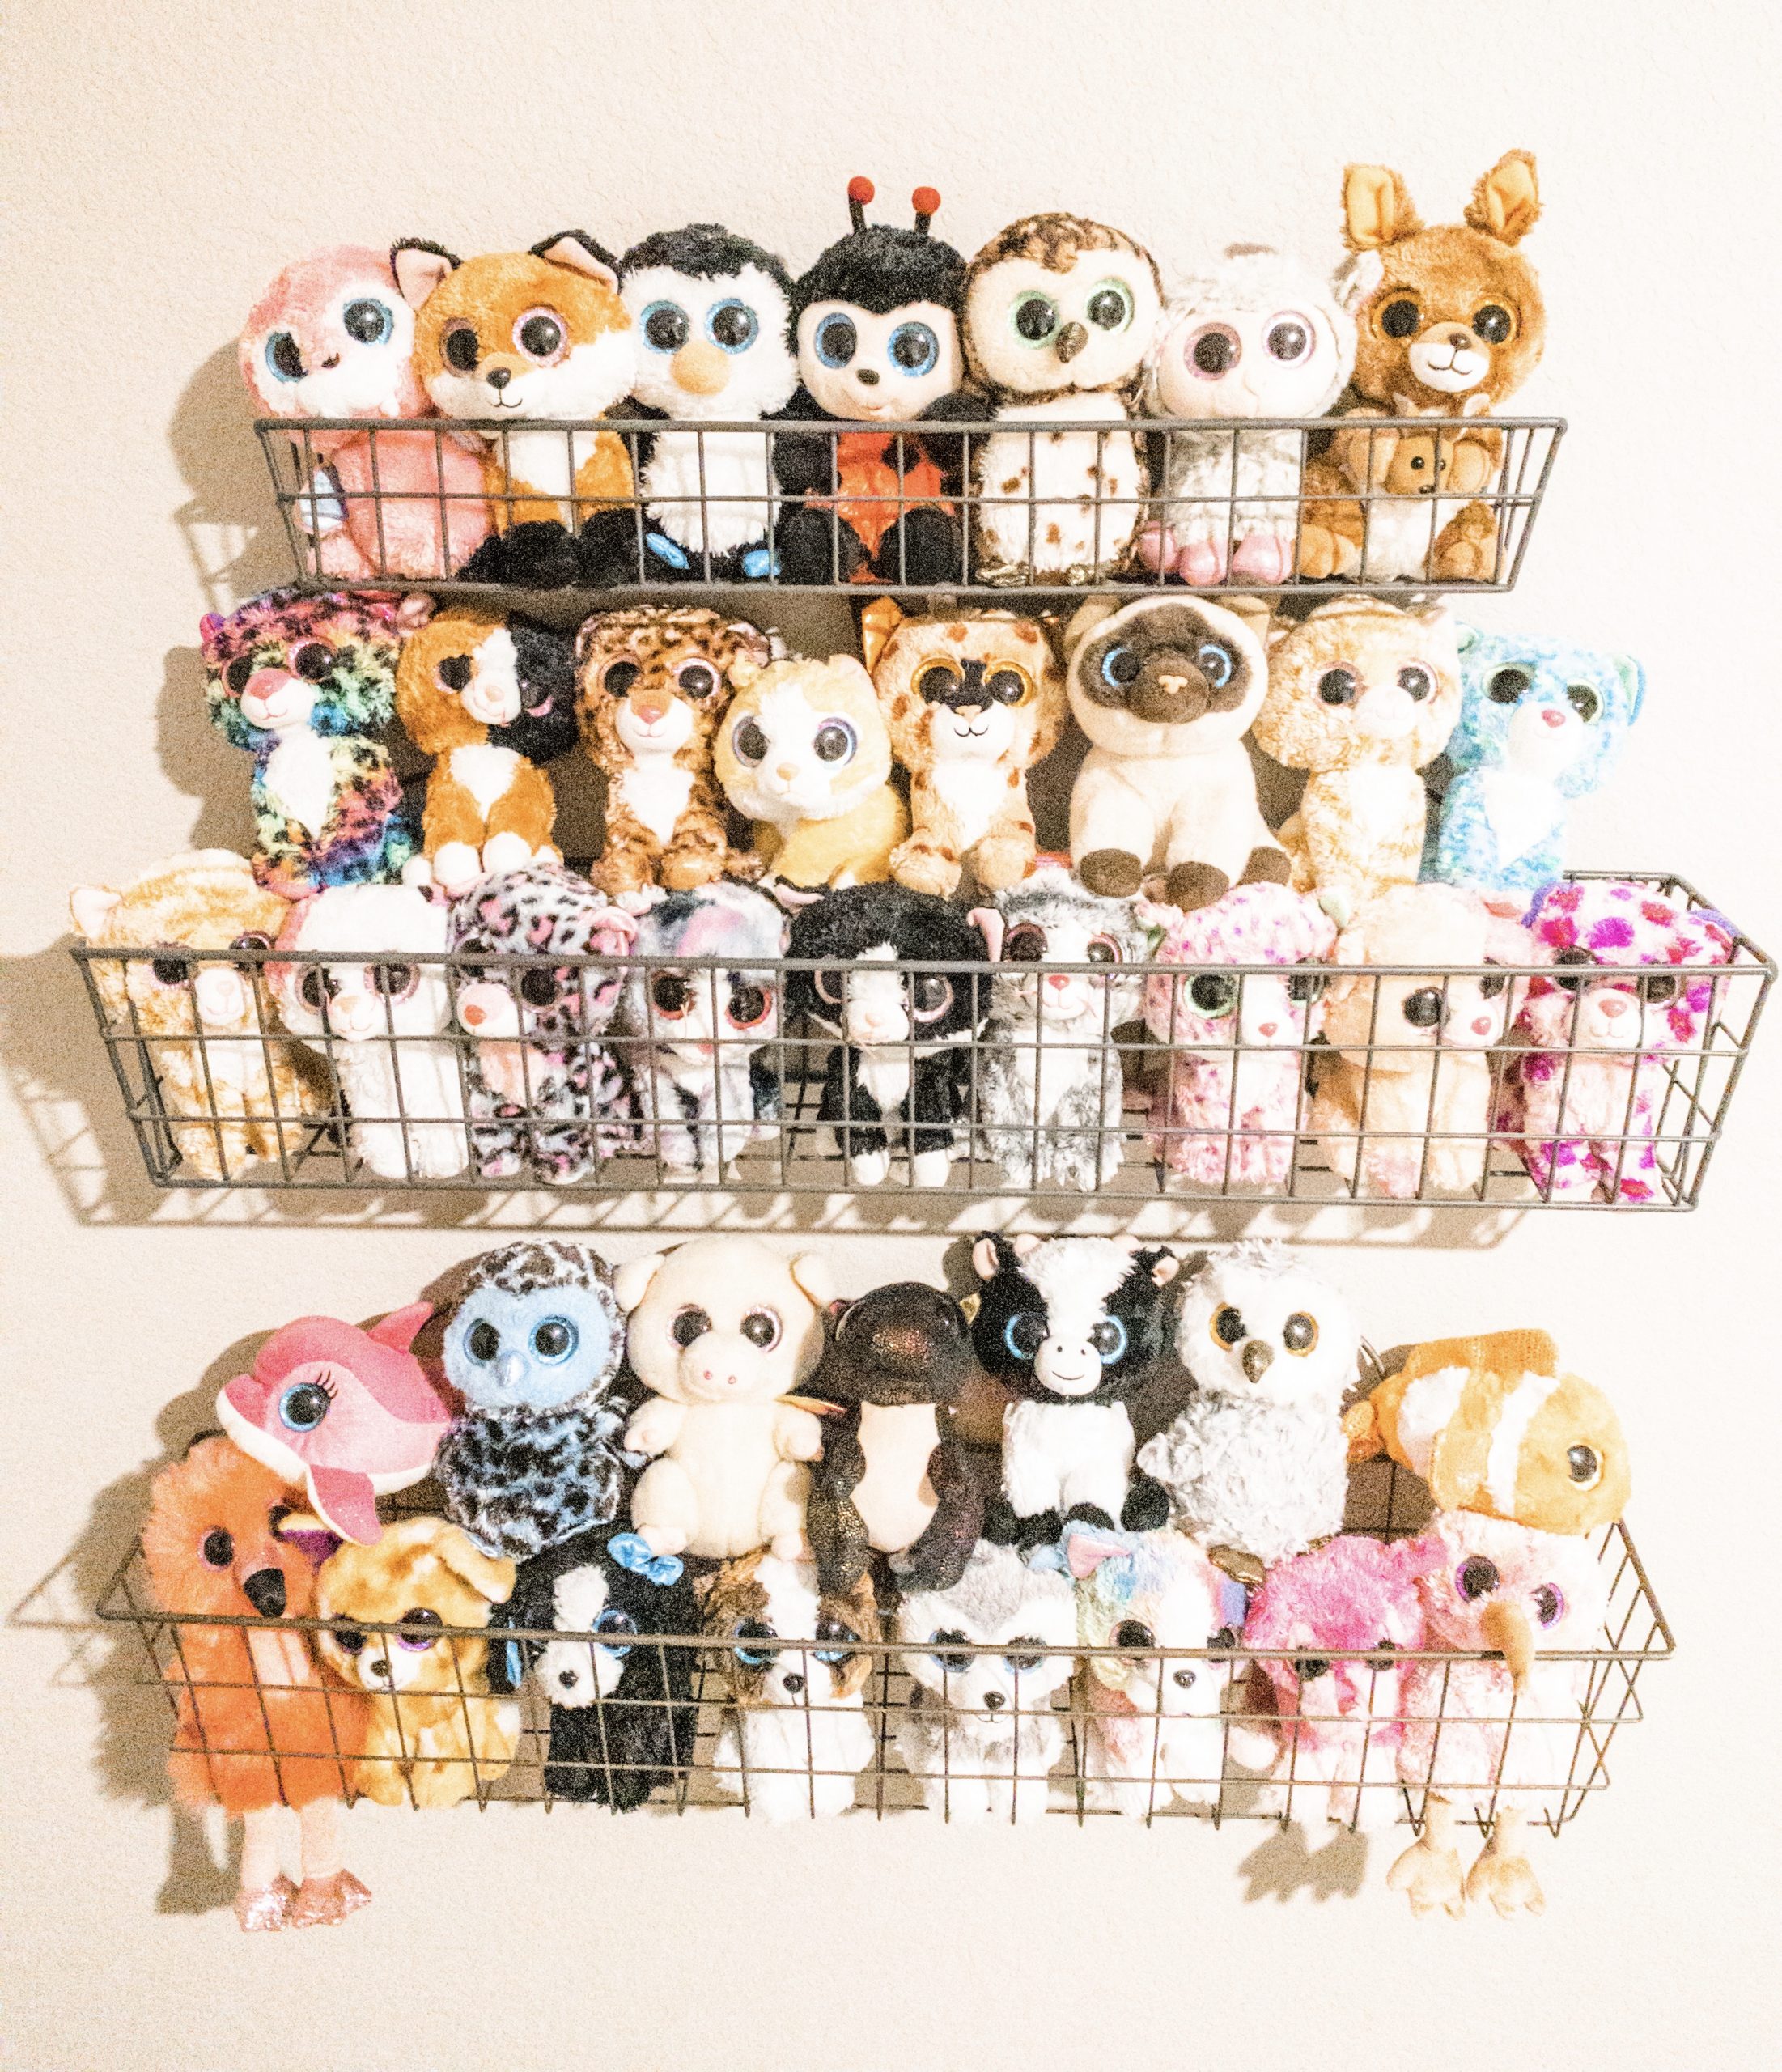 Wire baskets to hold stuffed animals